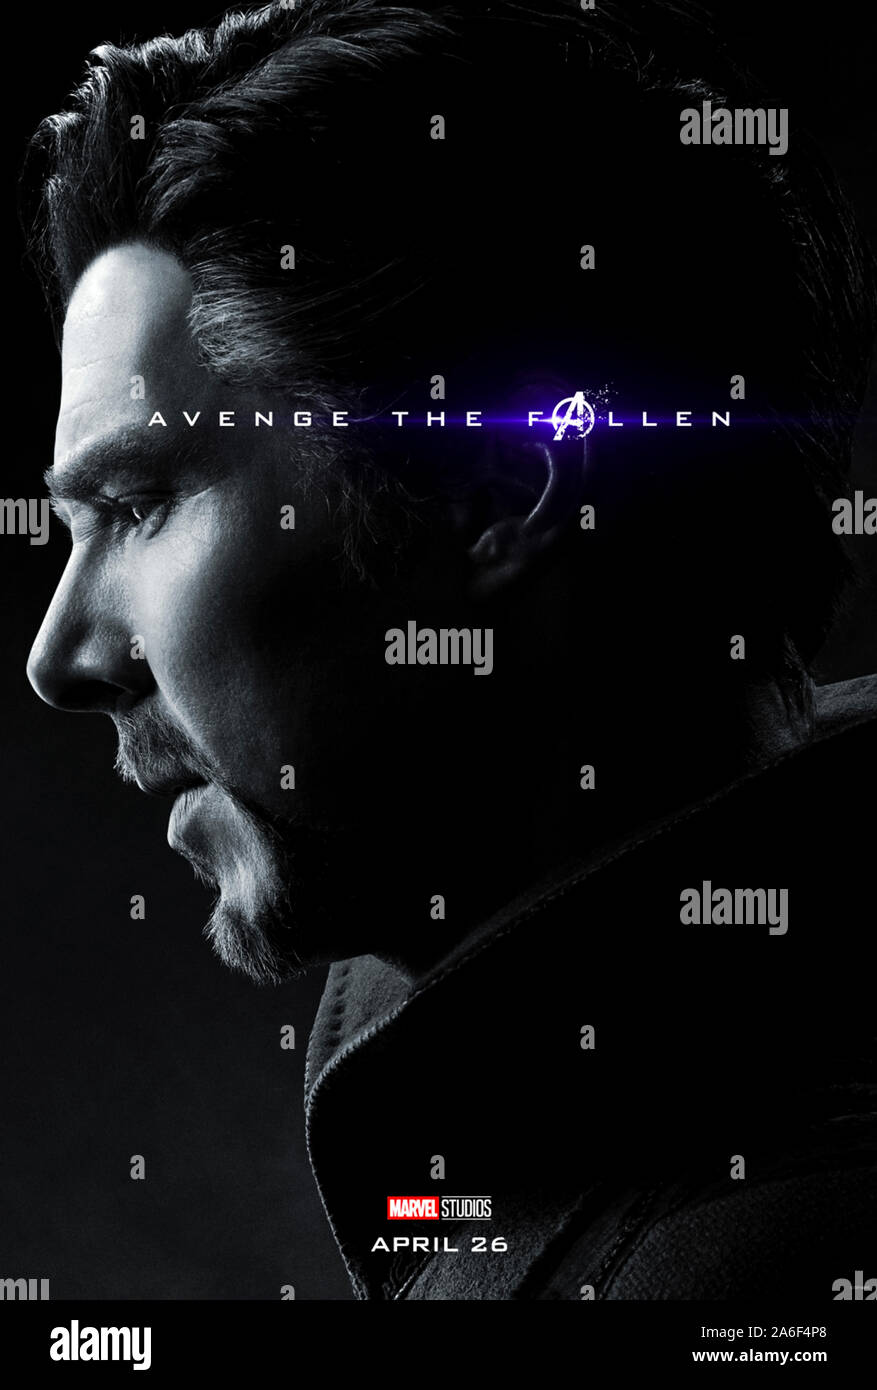 Character advance poster for Avengers: Endgame (2019) directed  by Anthony and Joe Russo starring Benedict Cumberbatch as Dr. Stephen Strange. The epic conclusion and 22nd film in the Marvel Cinematic Universe. Stock Photo